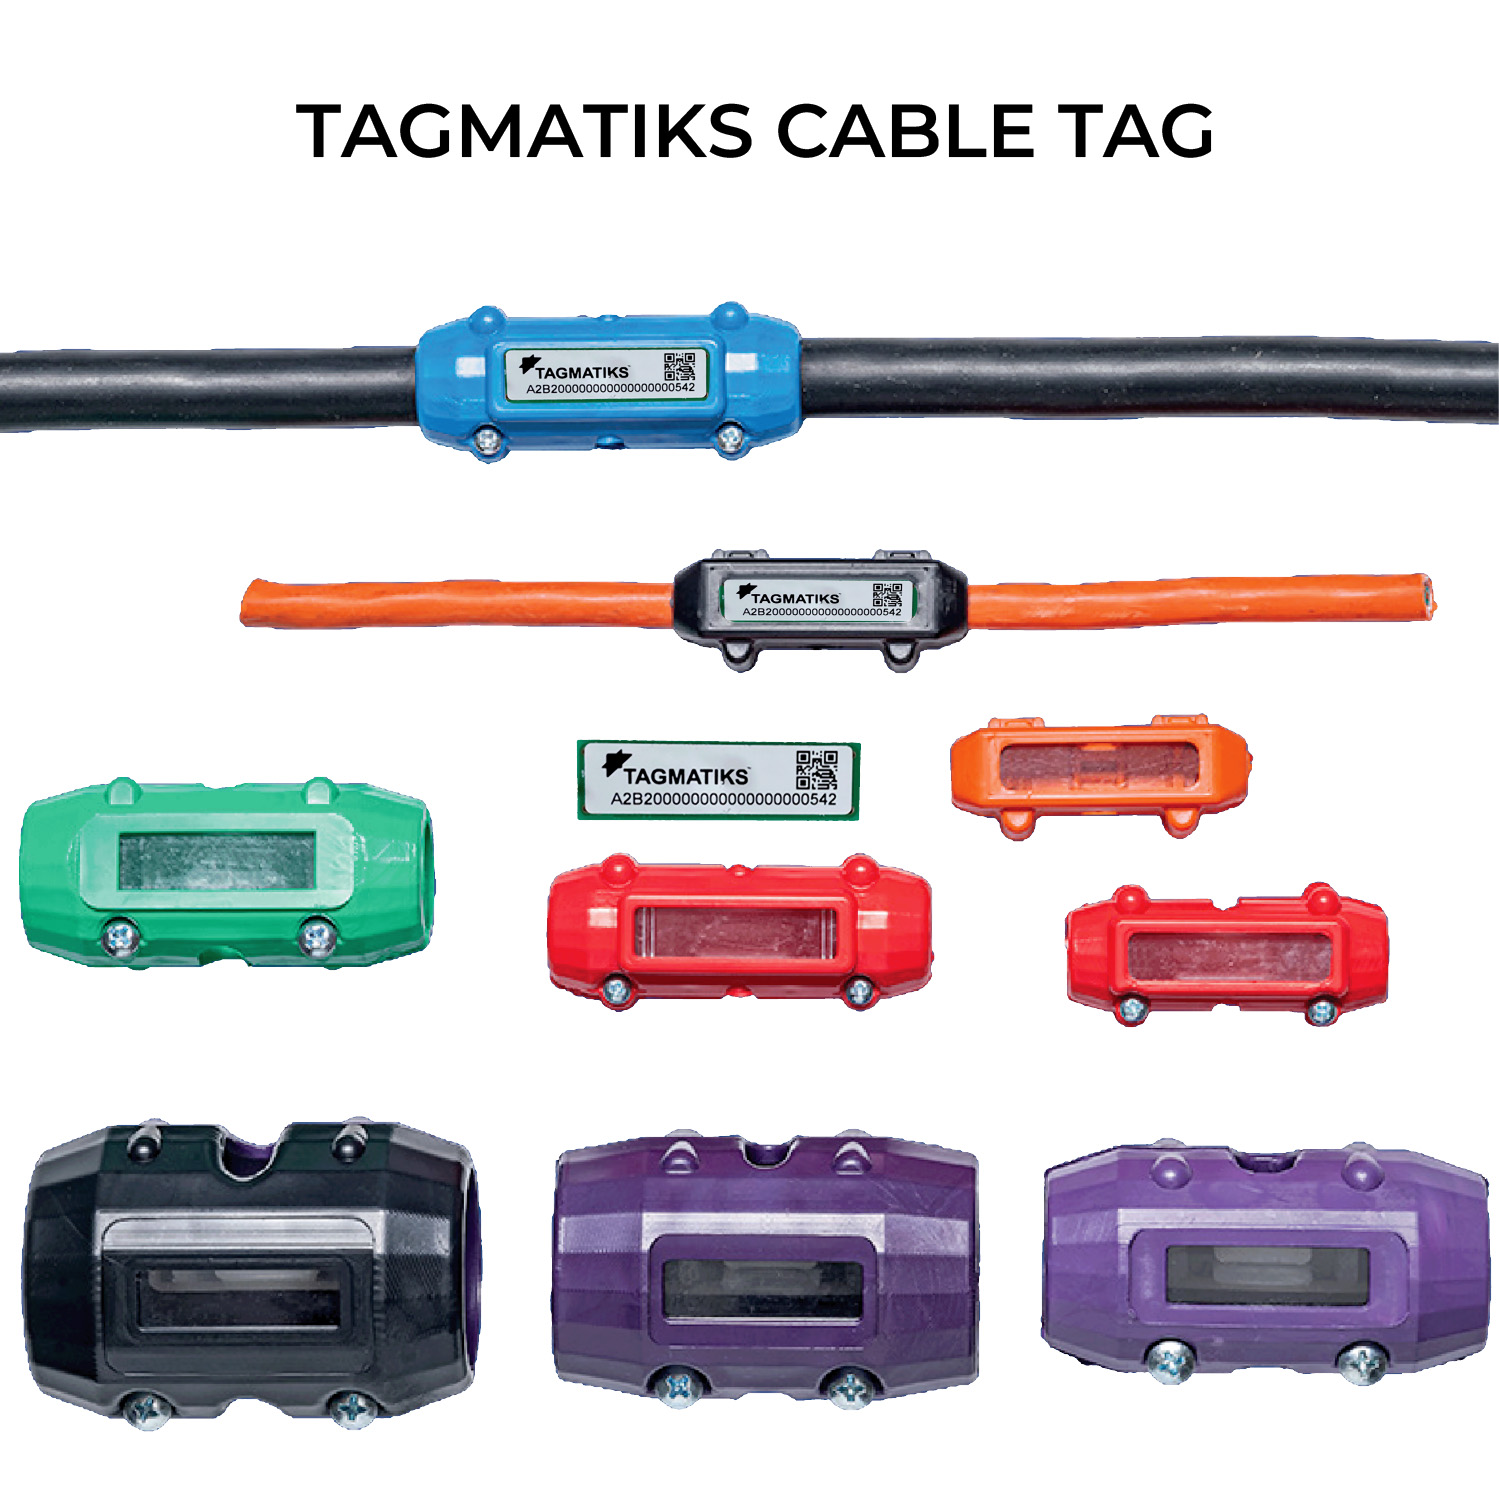  TagMatiks RFID Cable Tags used for tracking and managing cables in the audiovisual and rental industry